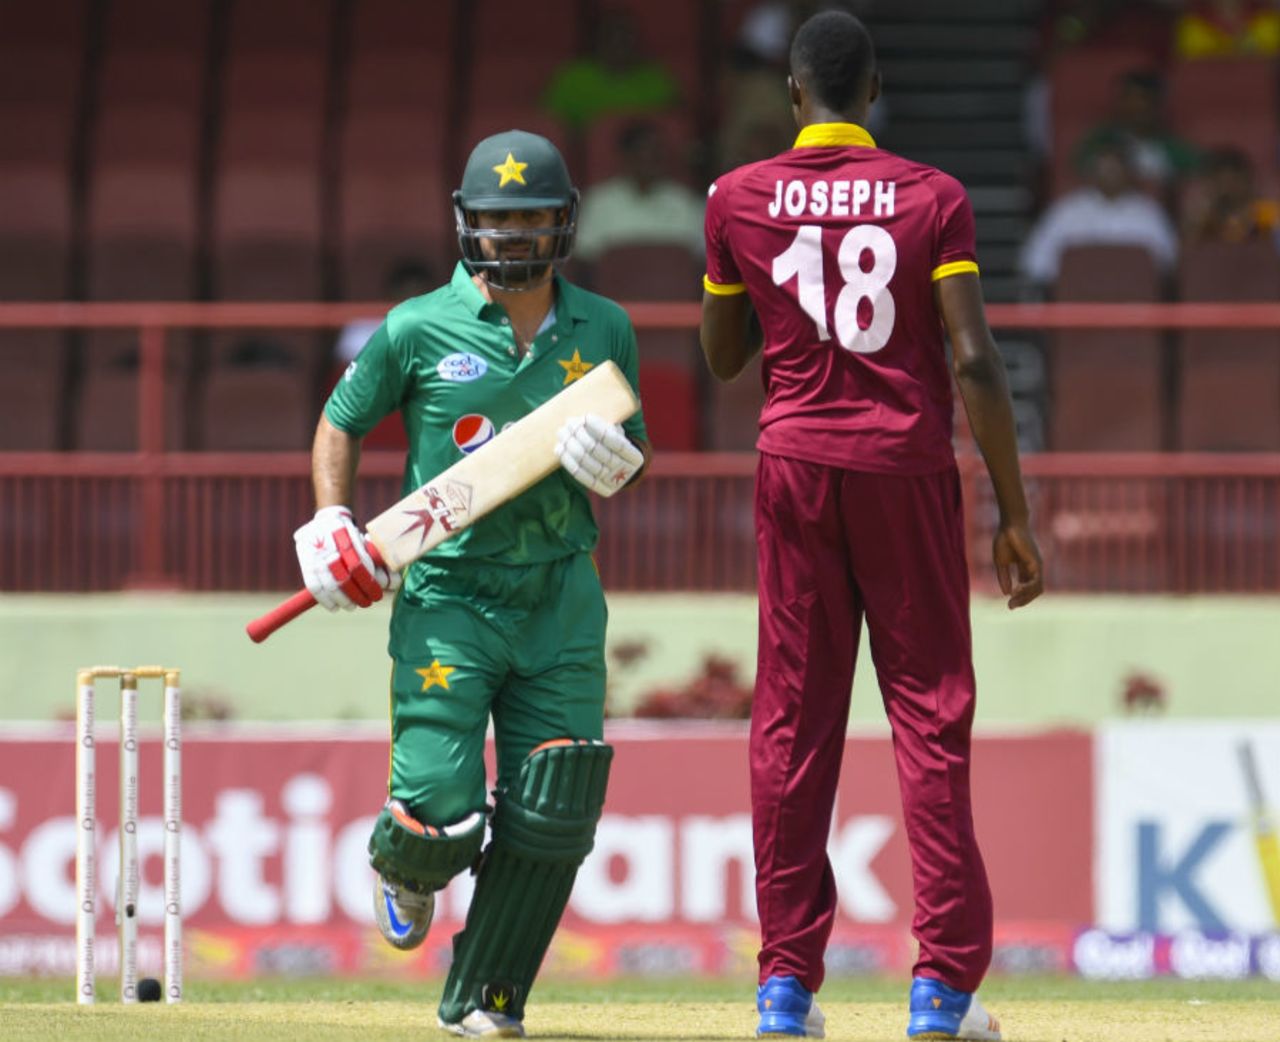 Ahmed Shehzad made a confident start to the ODI series, West Indies v Pakistan, 1st ODI, Guyana, April 7, 2017